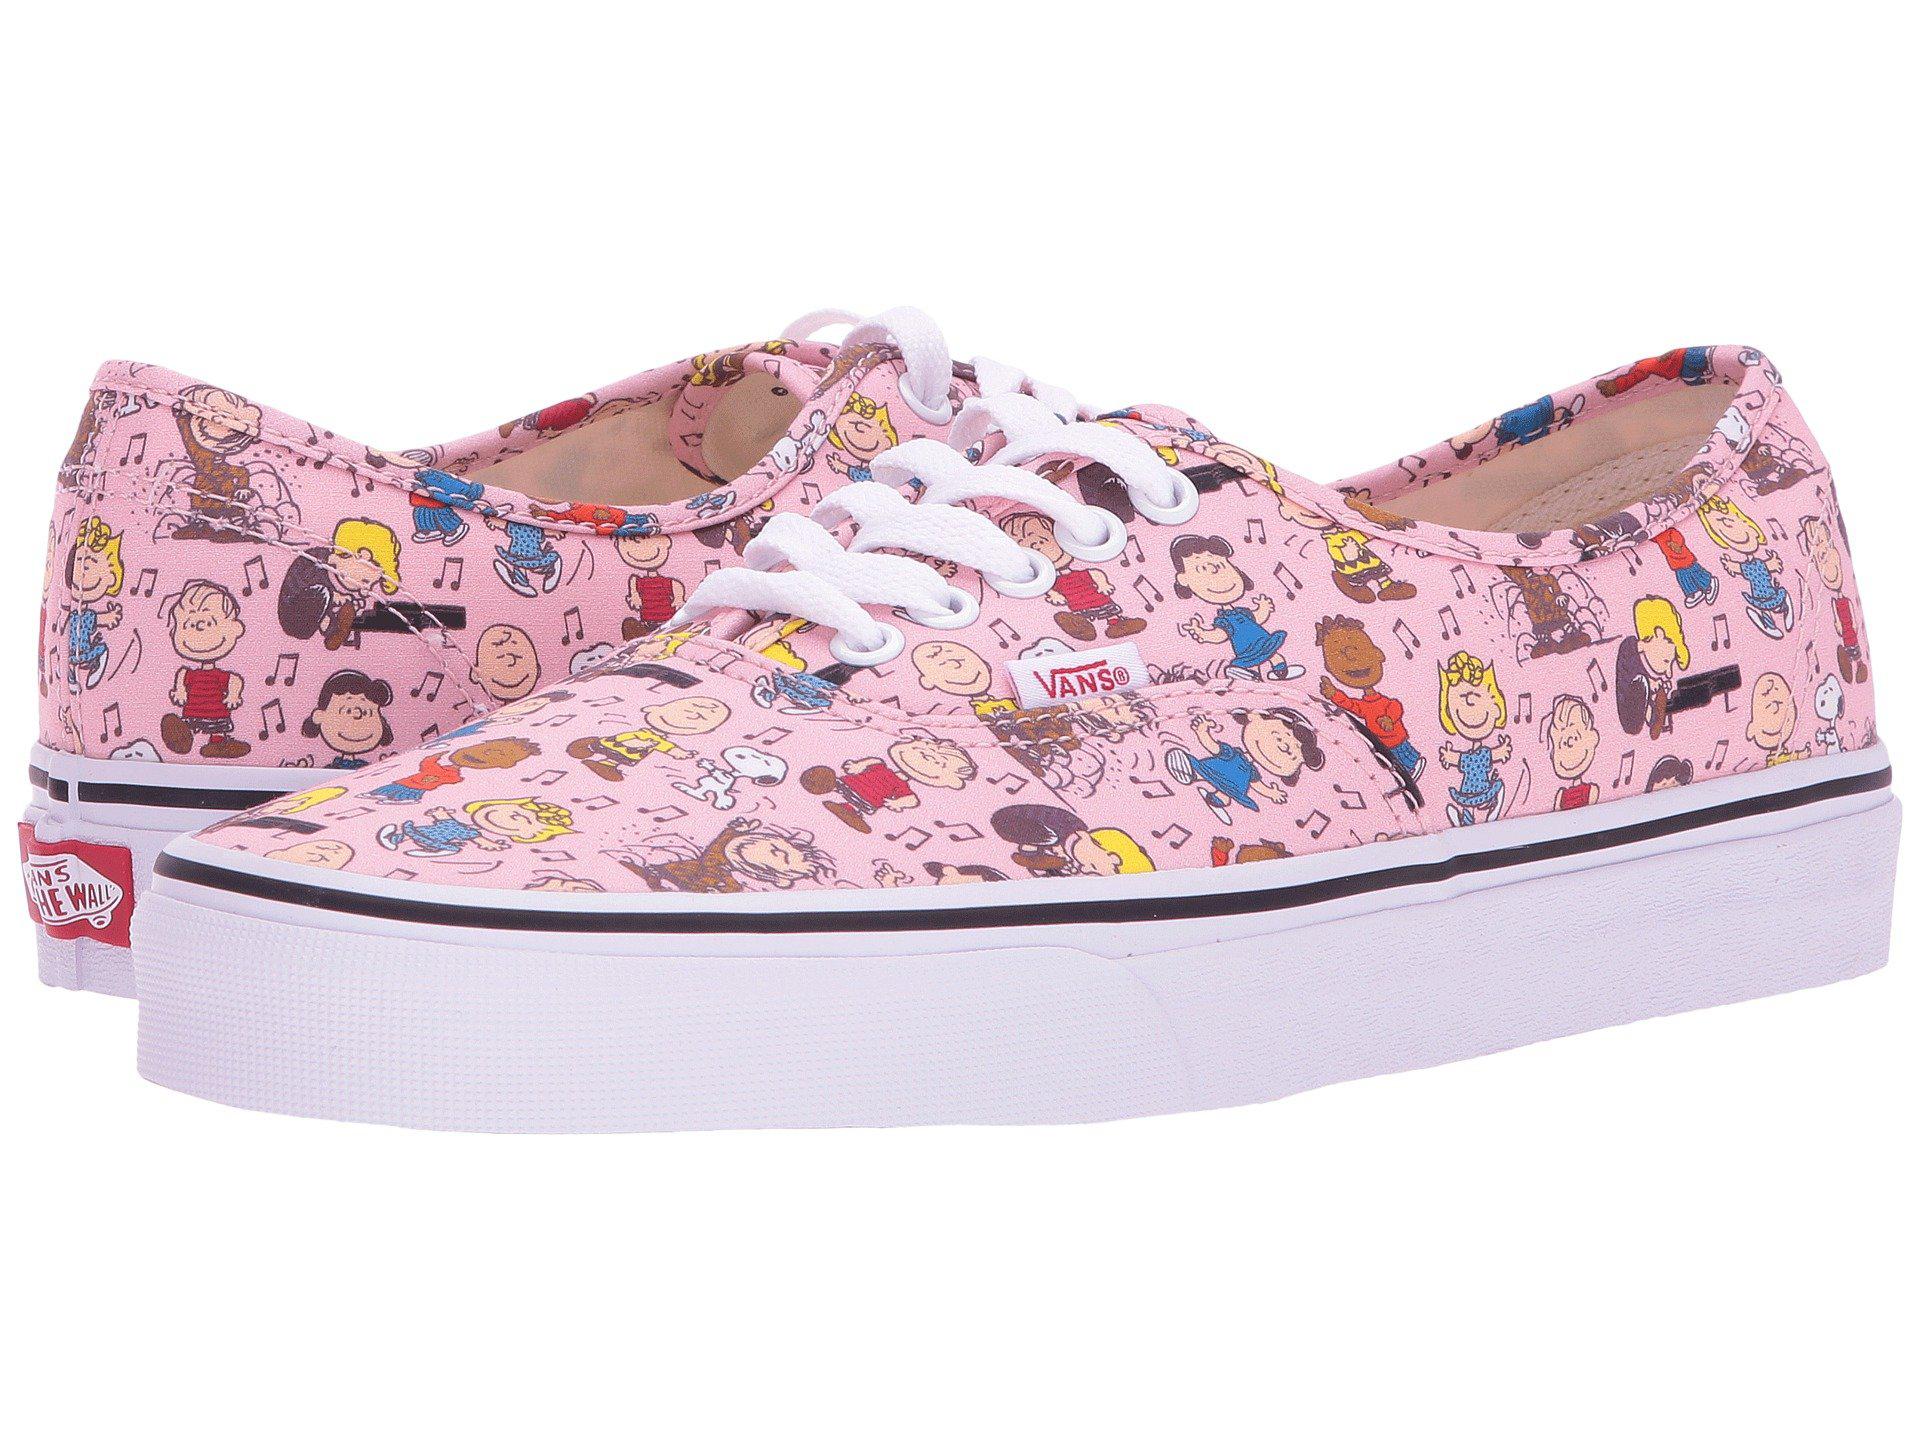 Vans Authentic X Peanuts Collaboration Flash Sales, 51% OFF |  www.smokymountains.org